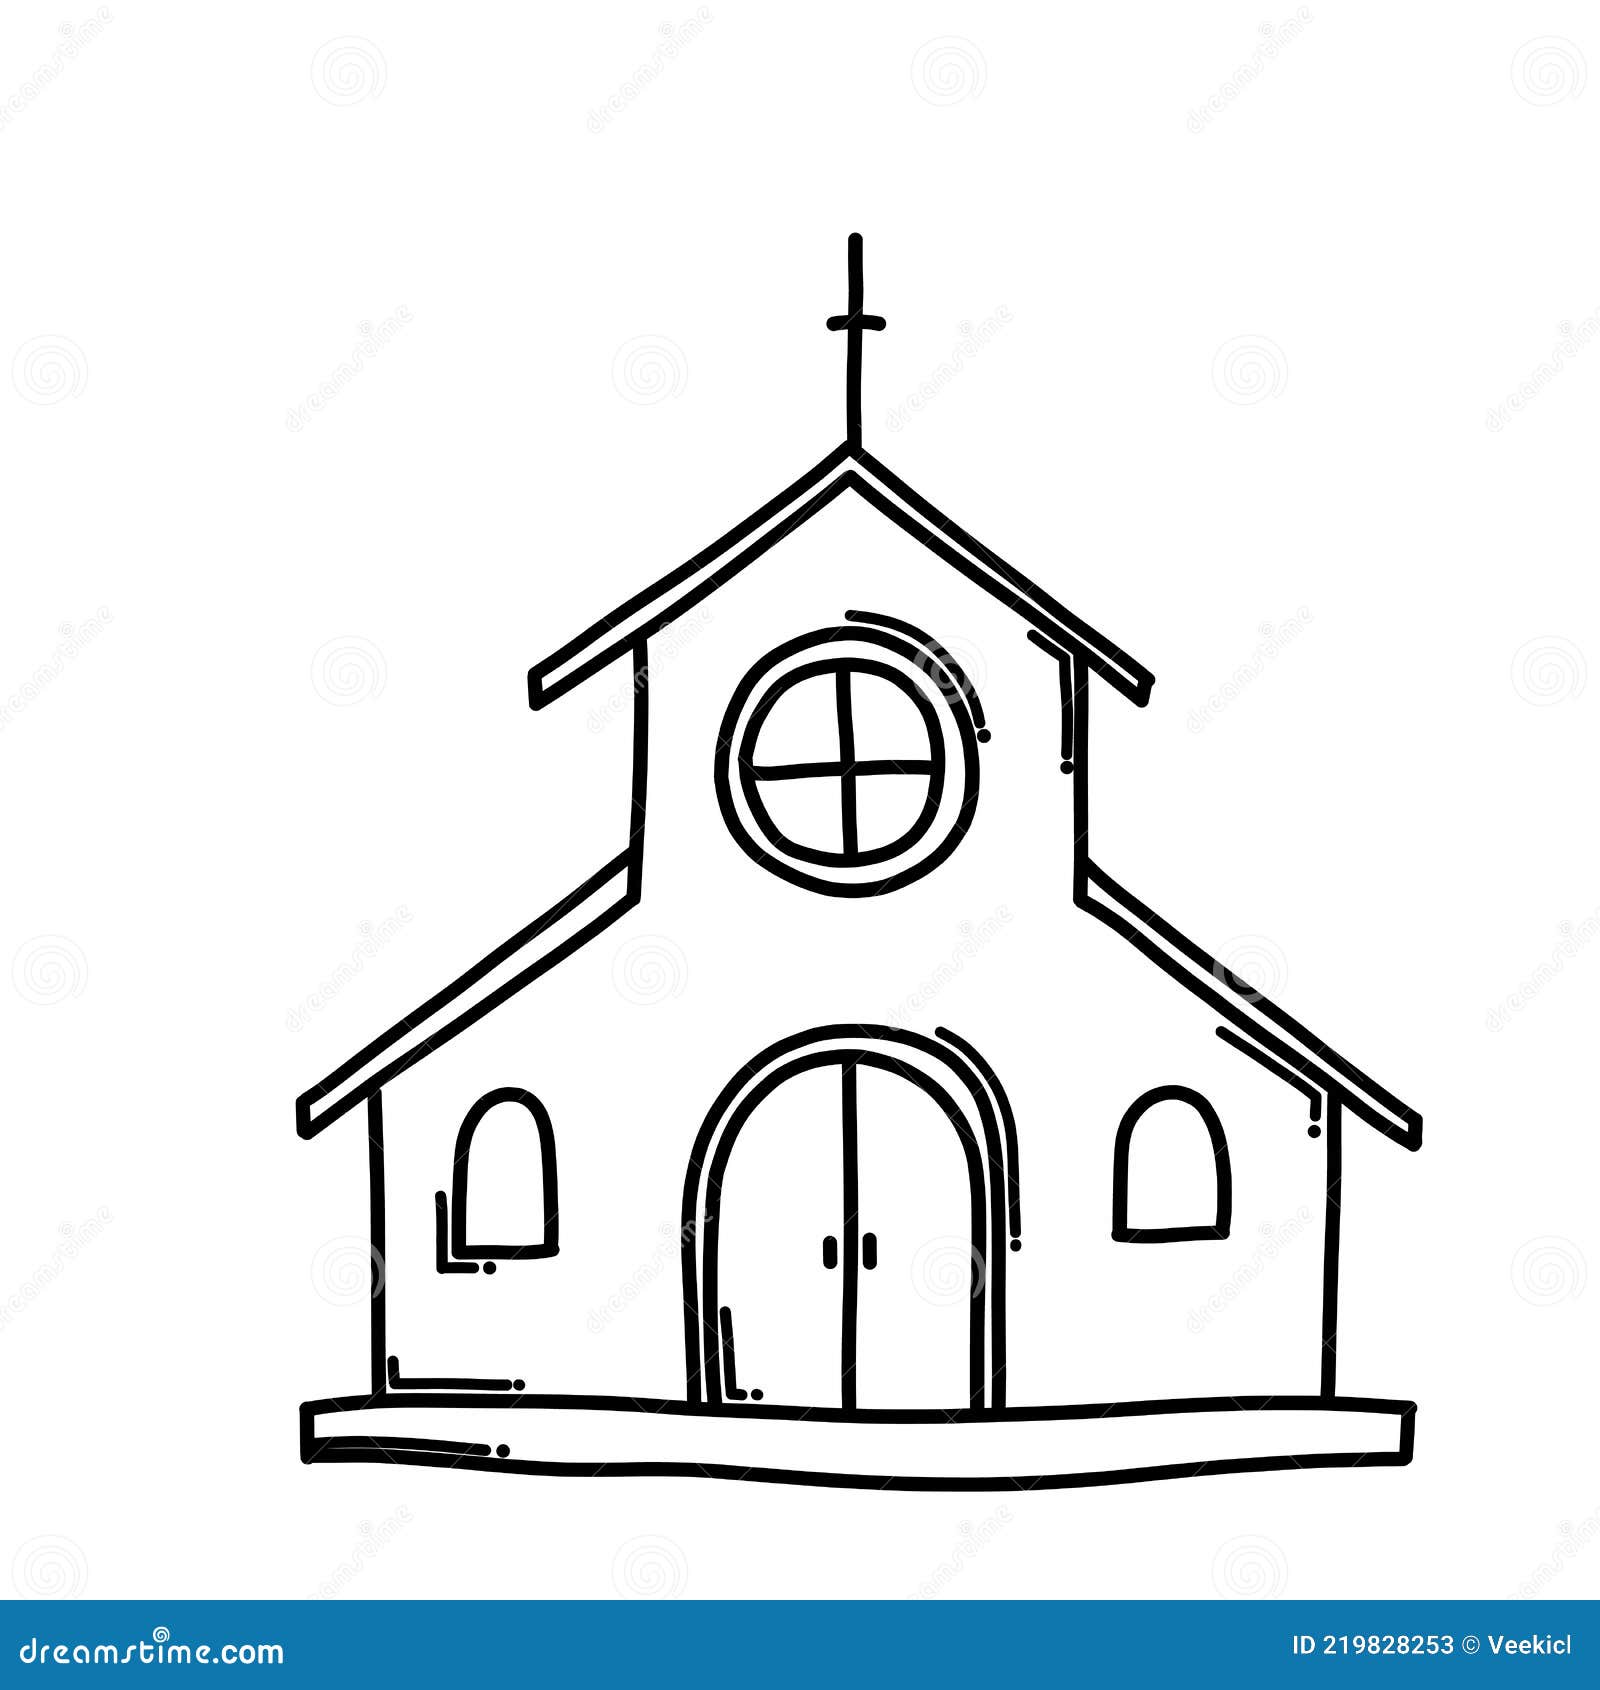 How to draw simple Church drawing for kids - part 61 - YouTube